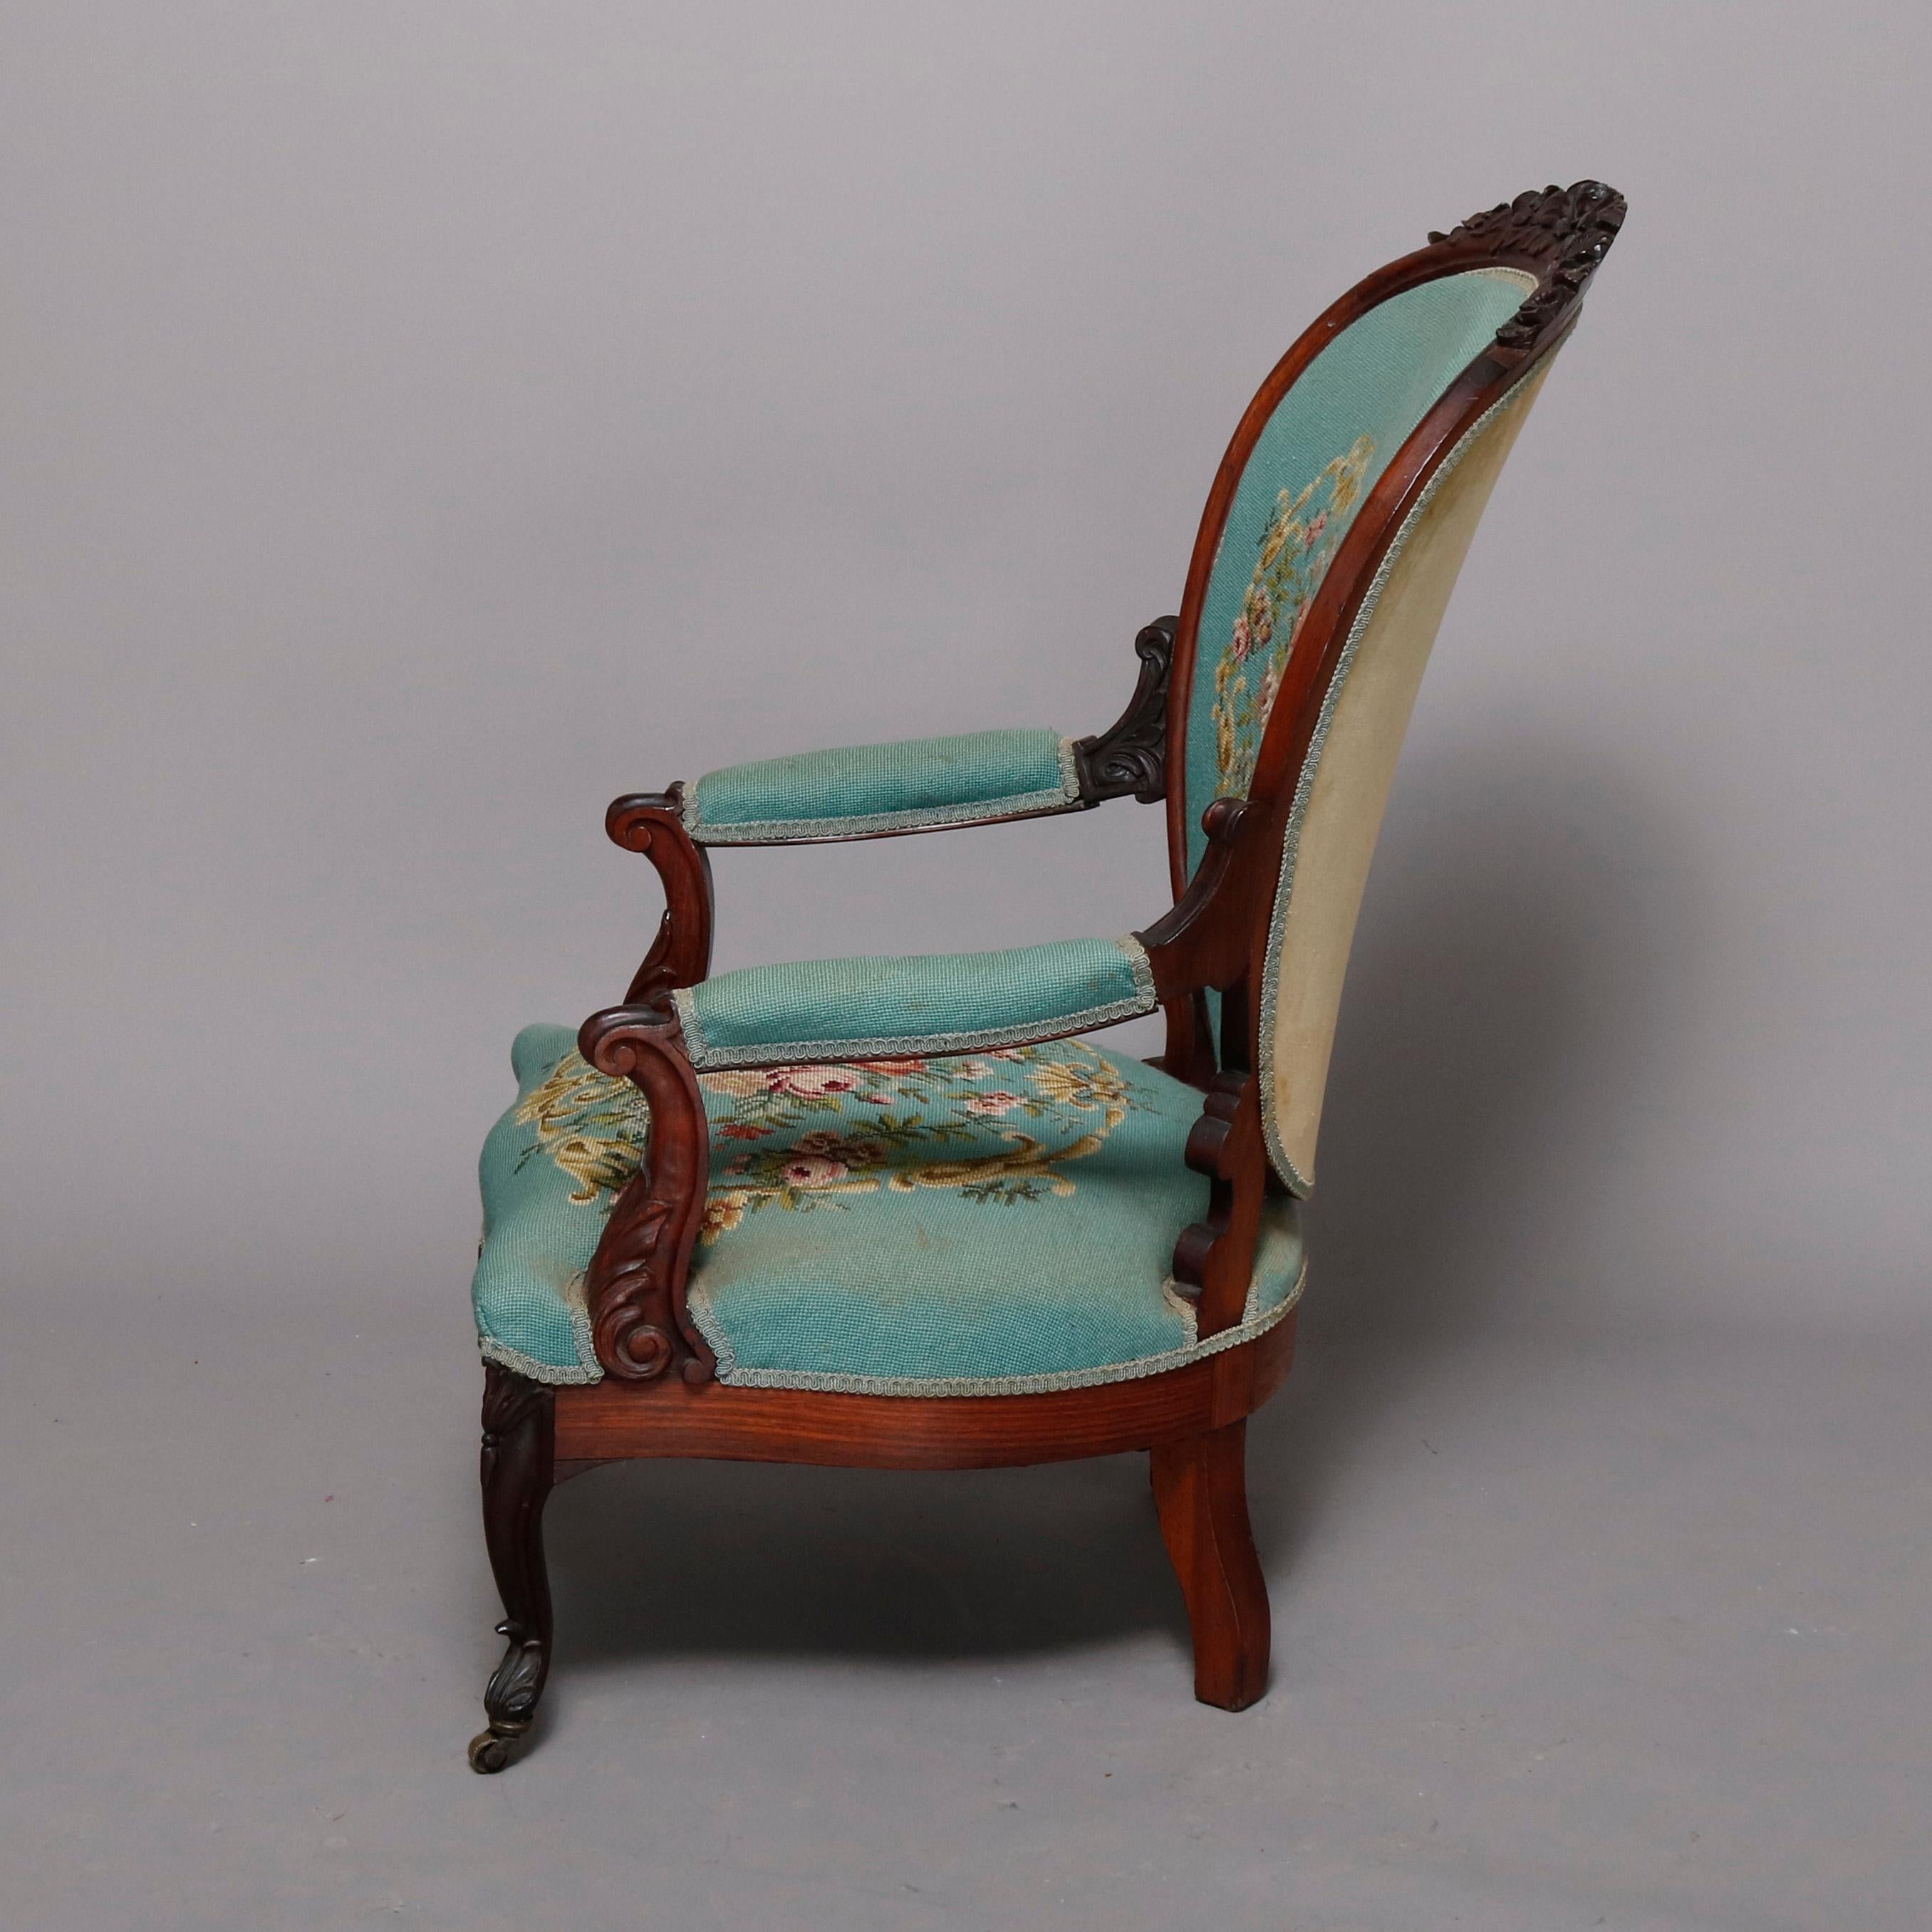 An antique Victorian parlor armchair offers walnut frame with carved floral and foliate crest surmounting medallion back with floral needlepoint upholstery, covered arms and matching seat, raised on cabriole legs, circa 1880

Measures: 40.5